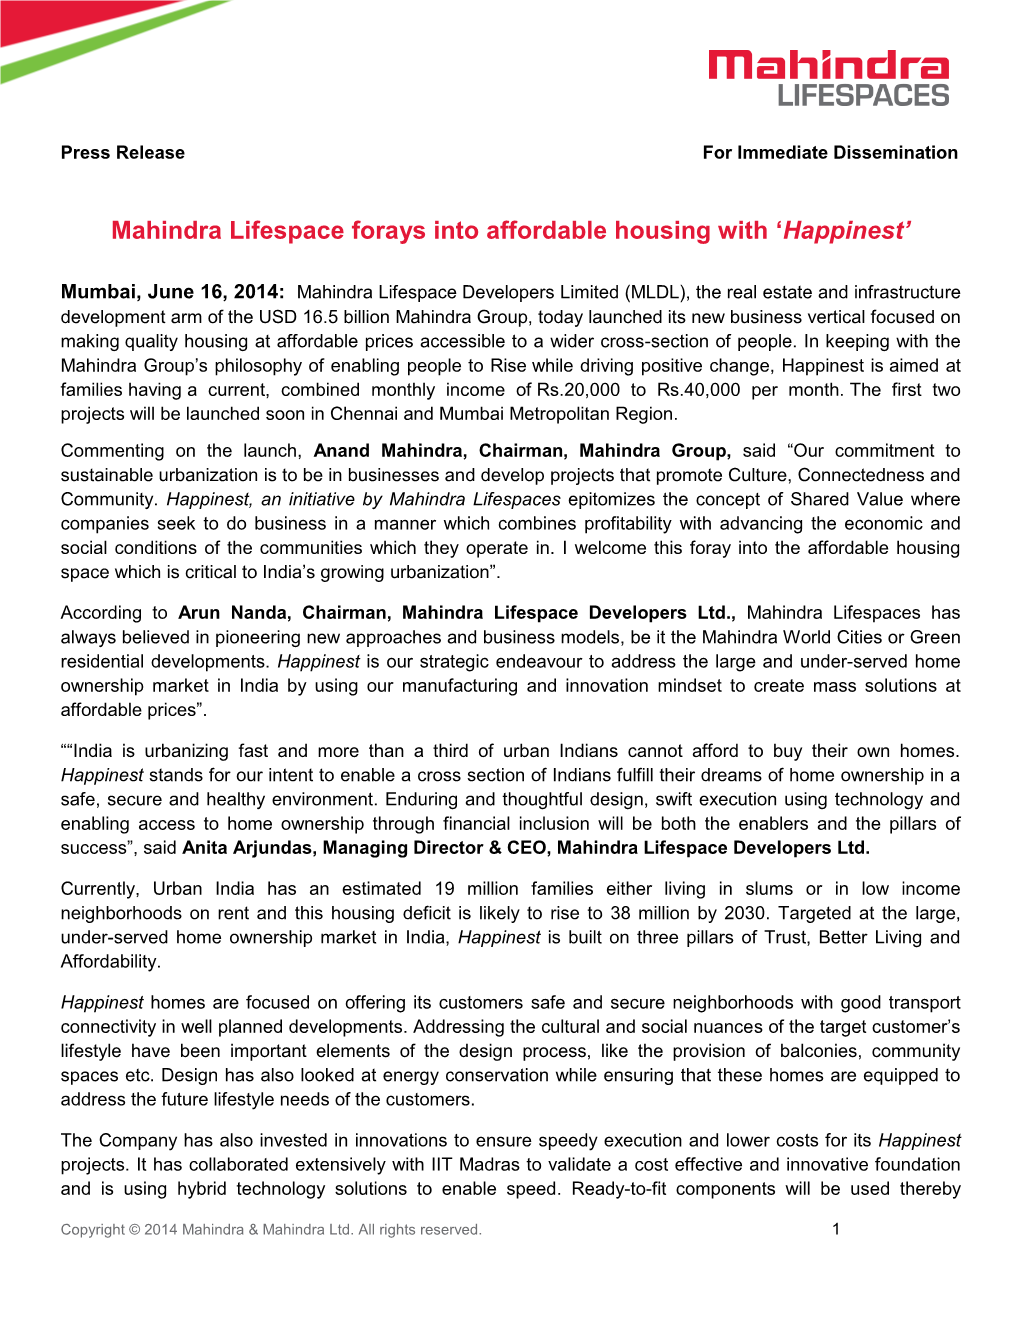 Mahindra Lifespace Forays Into Affordable Housing with ‘Happinest’